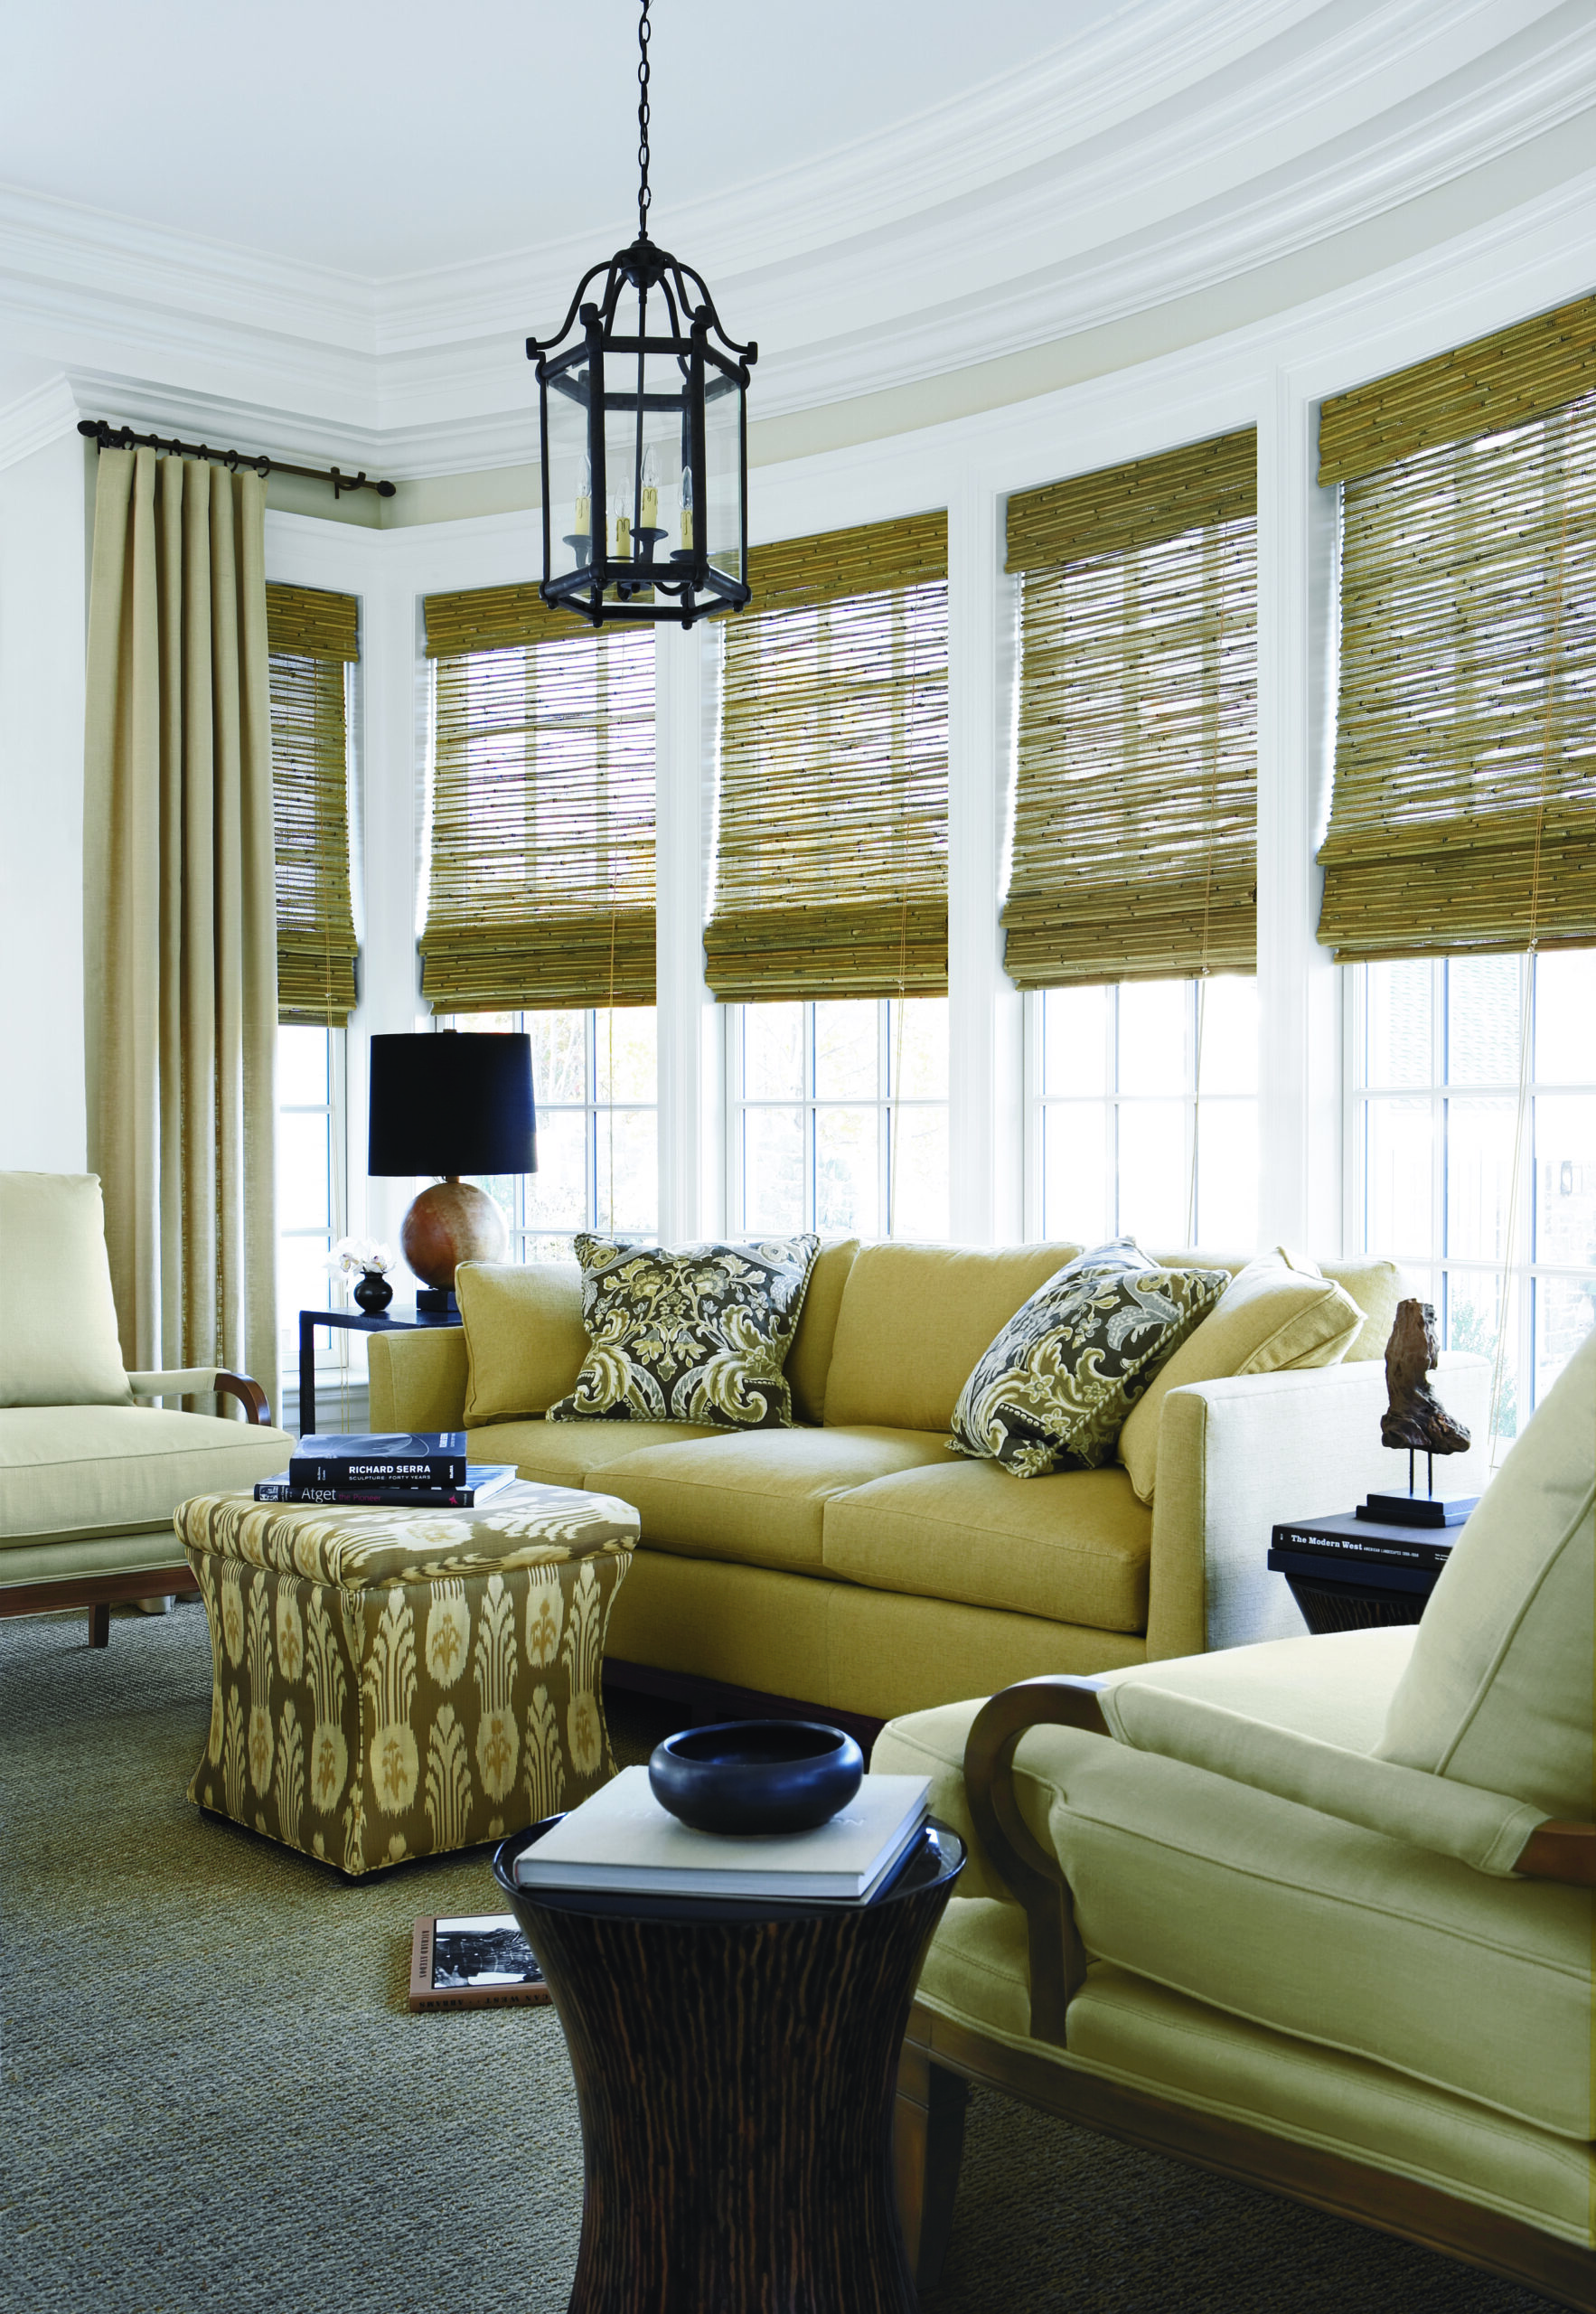 Grand Park Room HD blinds and shutters